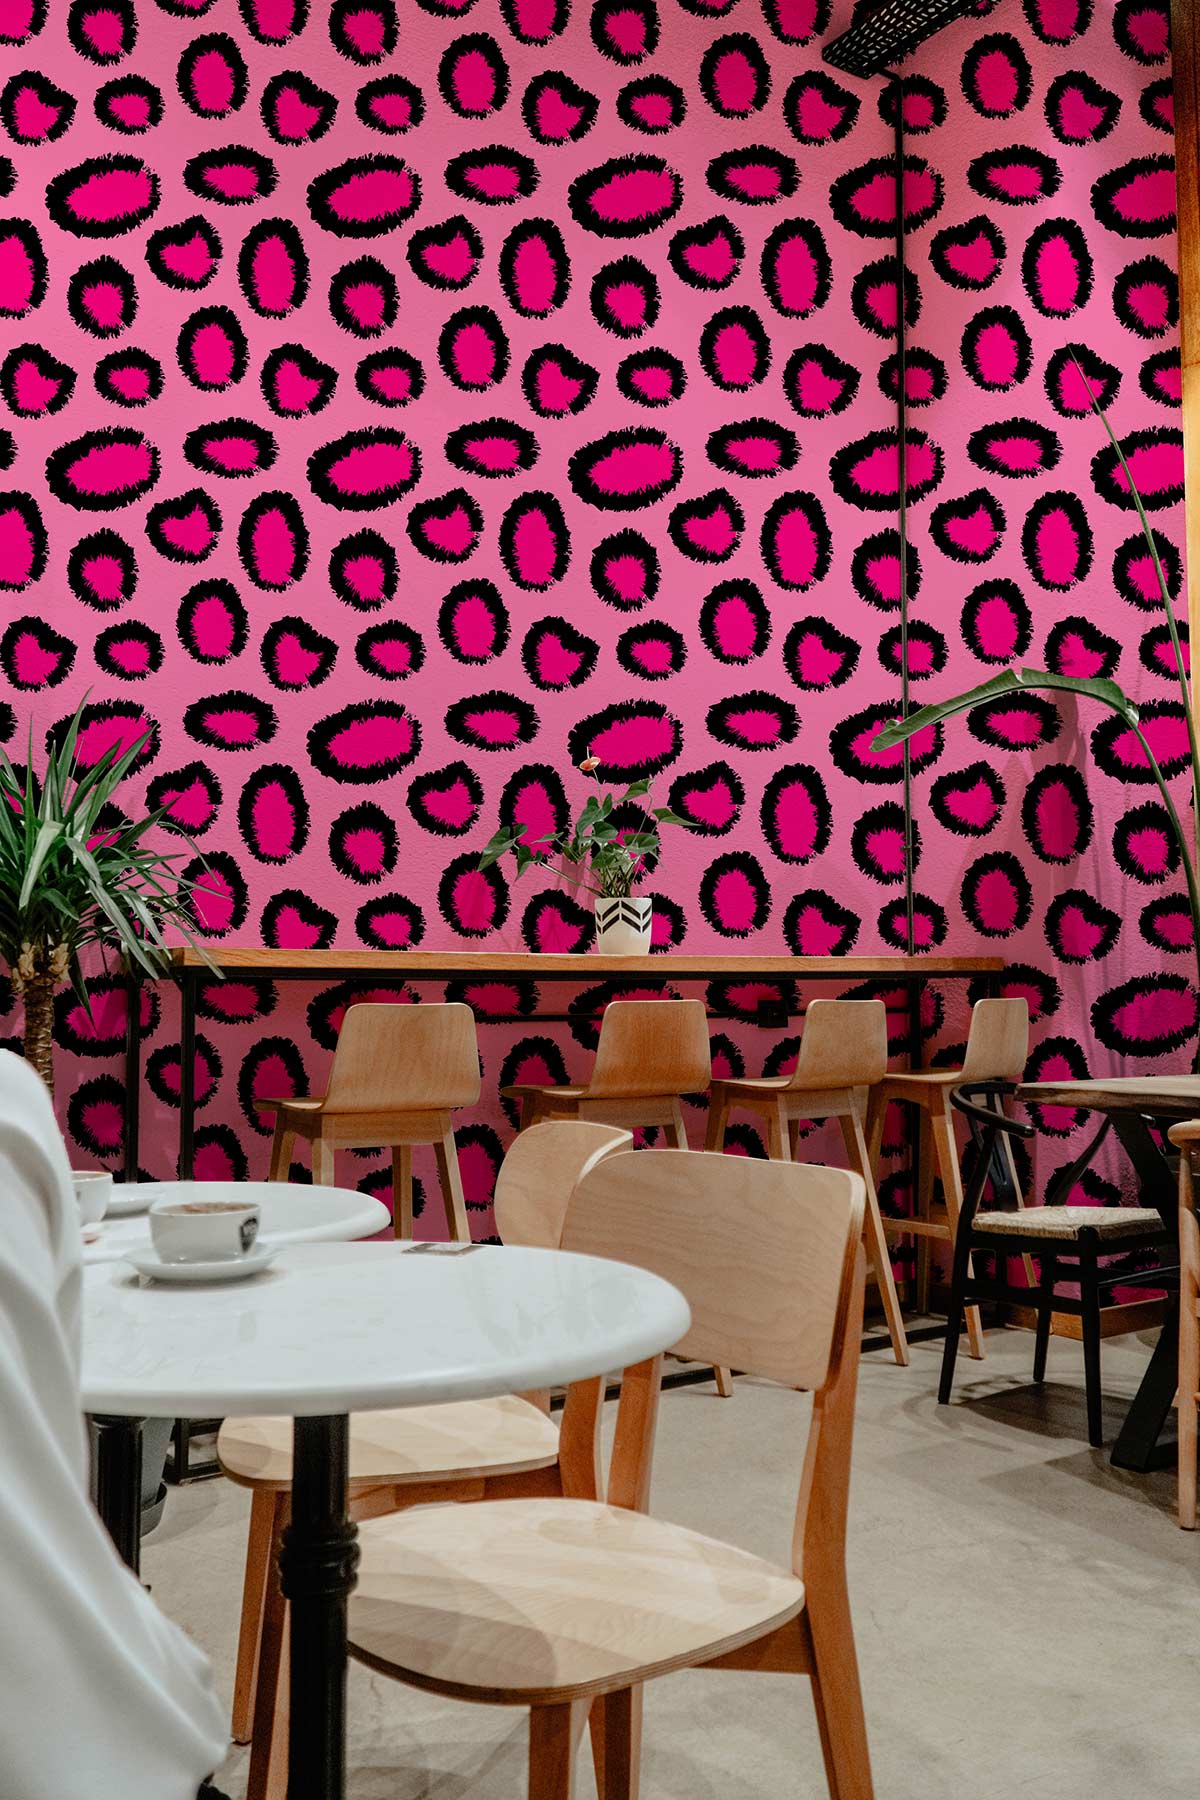 Wallpaper mural with a pink leopard print and animal skin pattern, intended for use in restaurants.